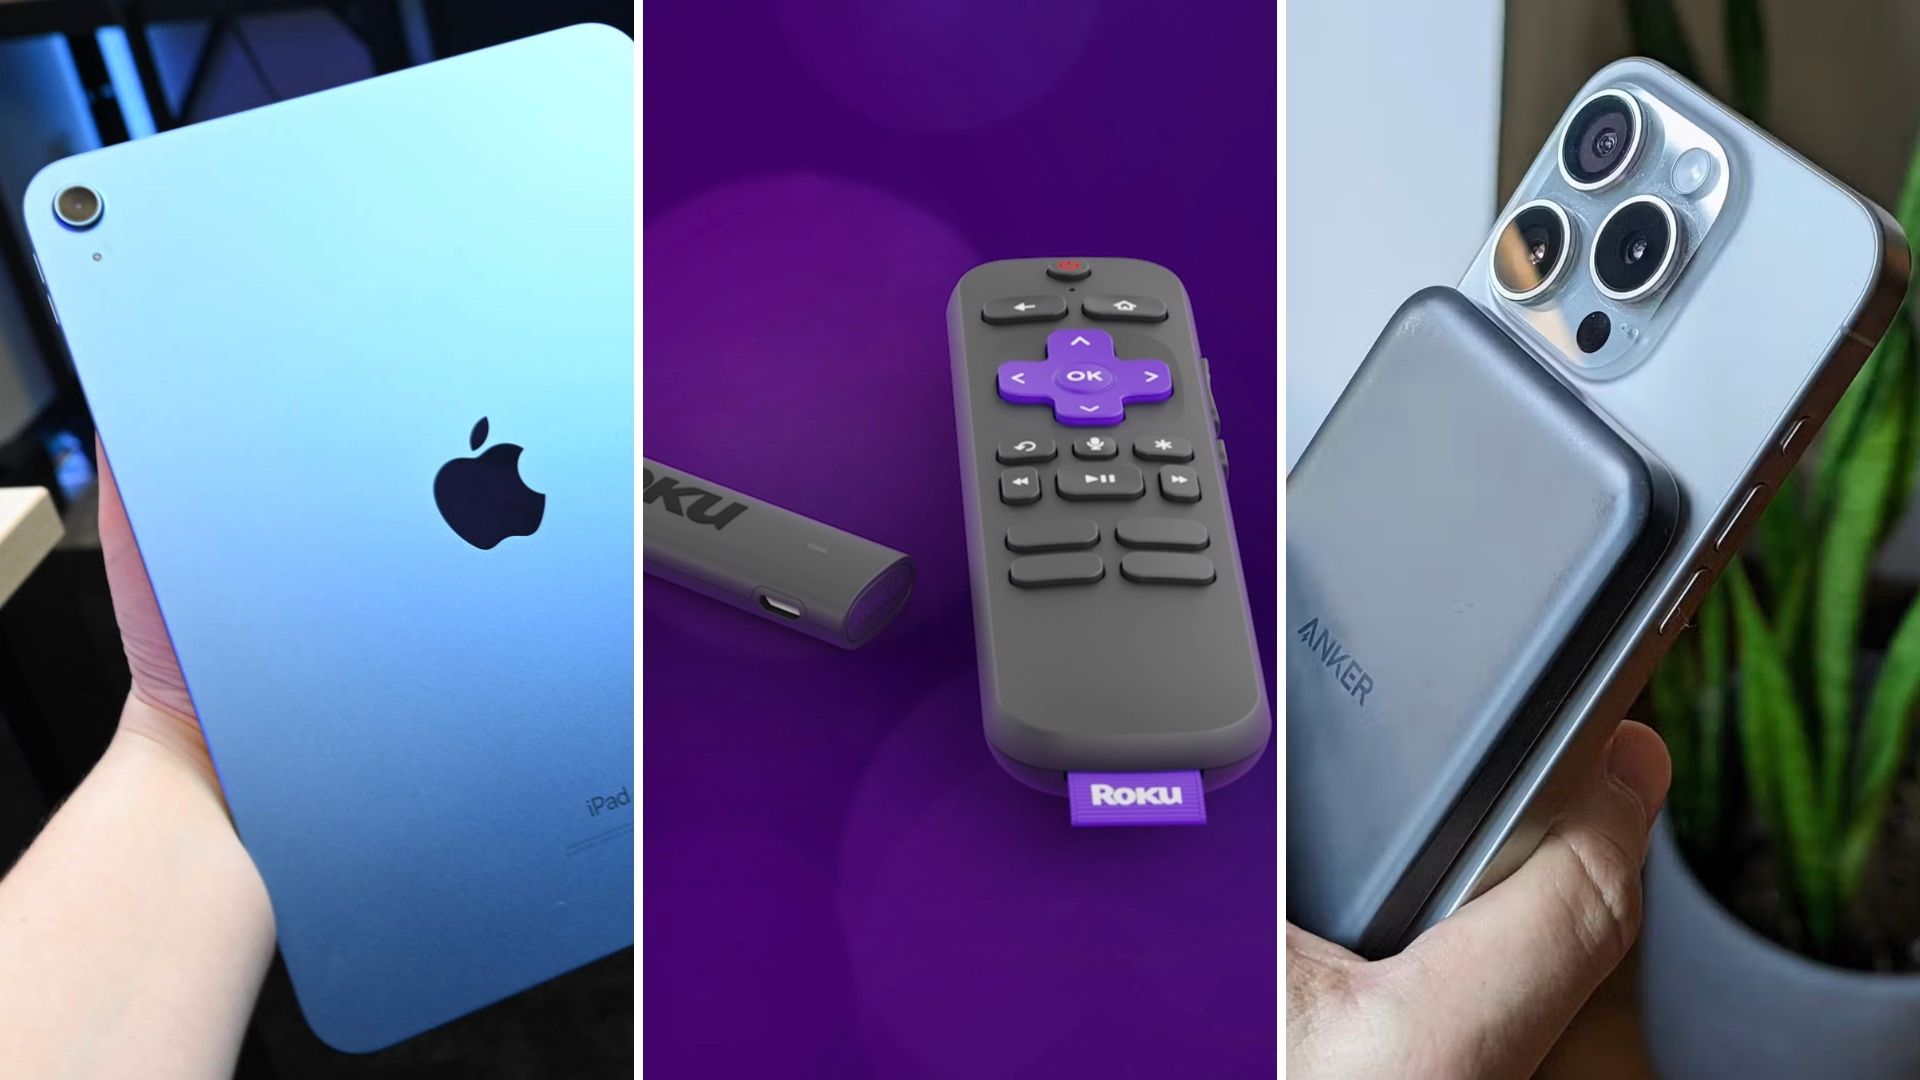 HTG Deals featuring Apple, Roku, and Anker